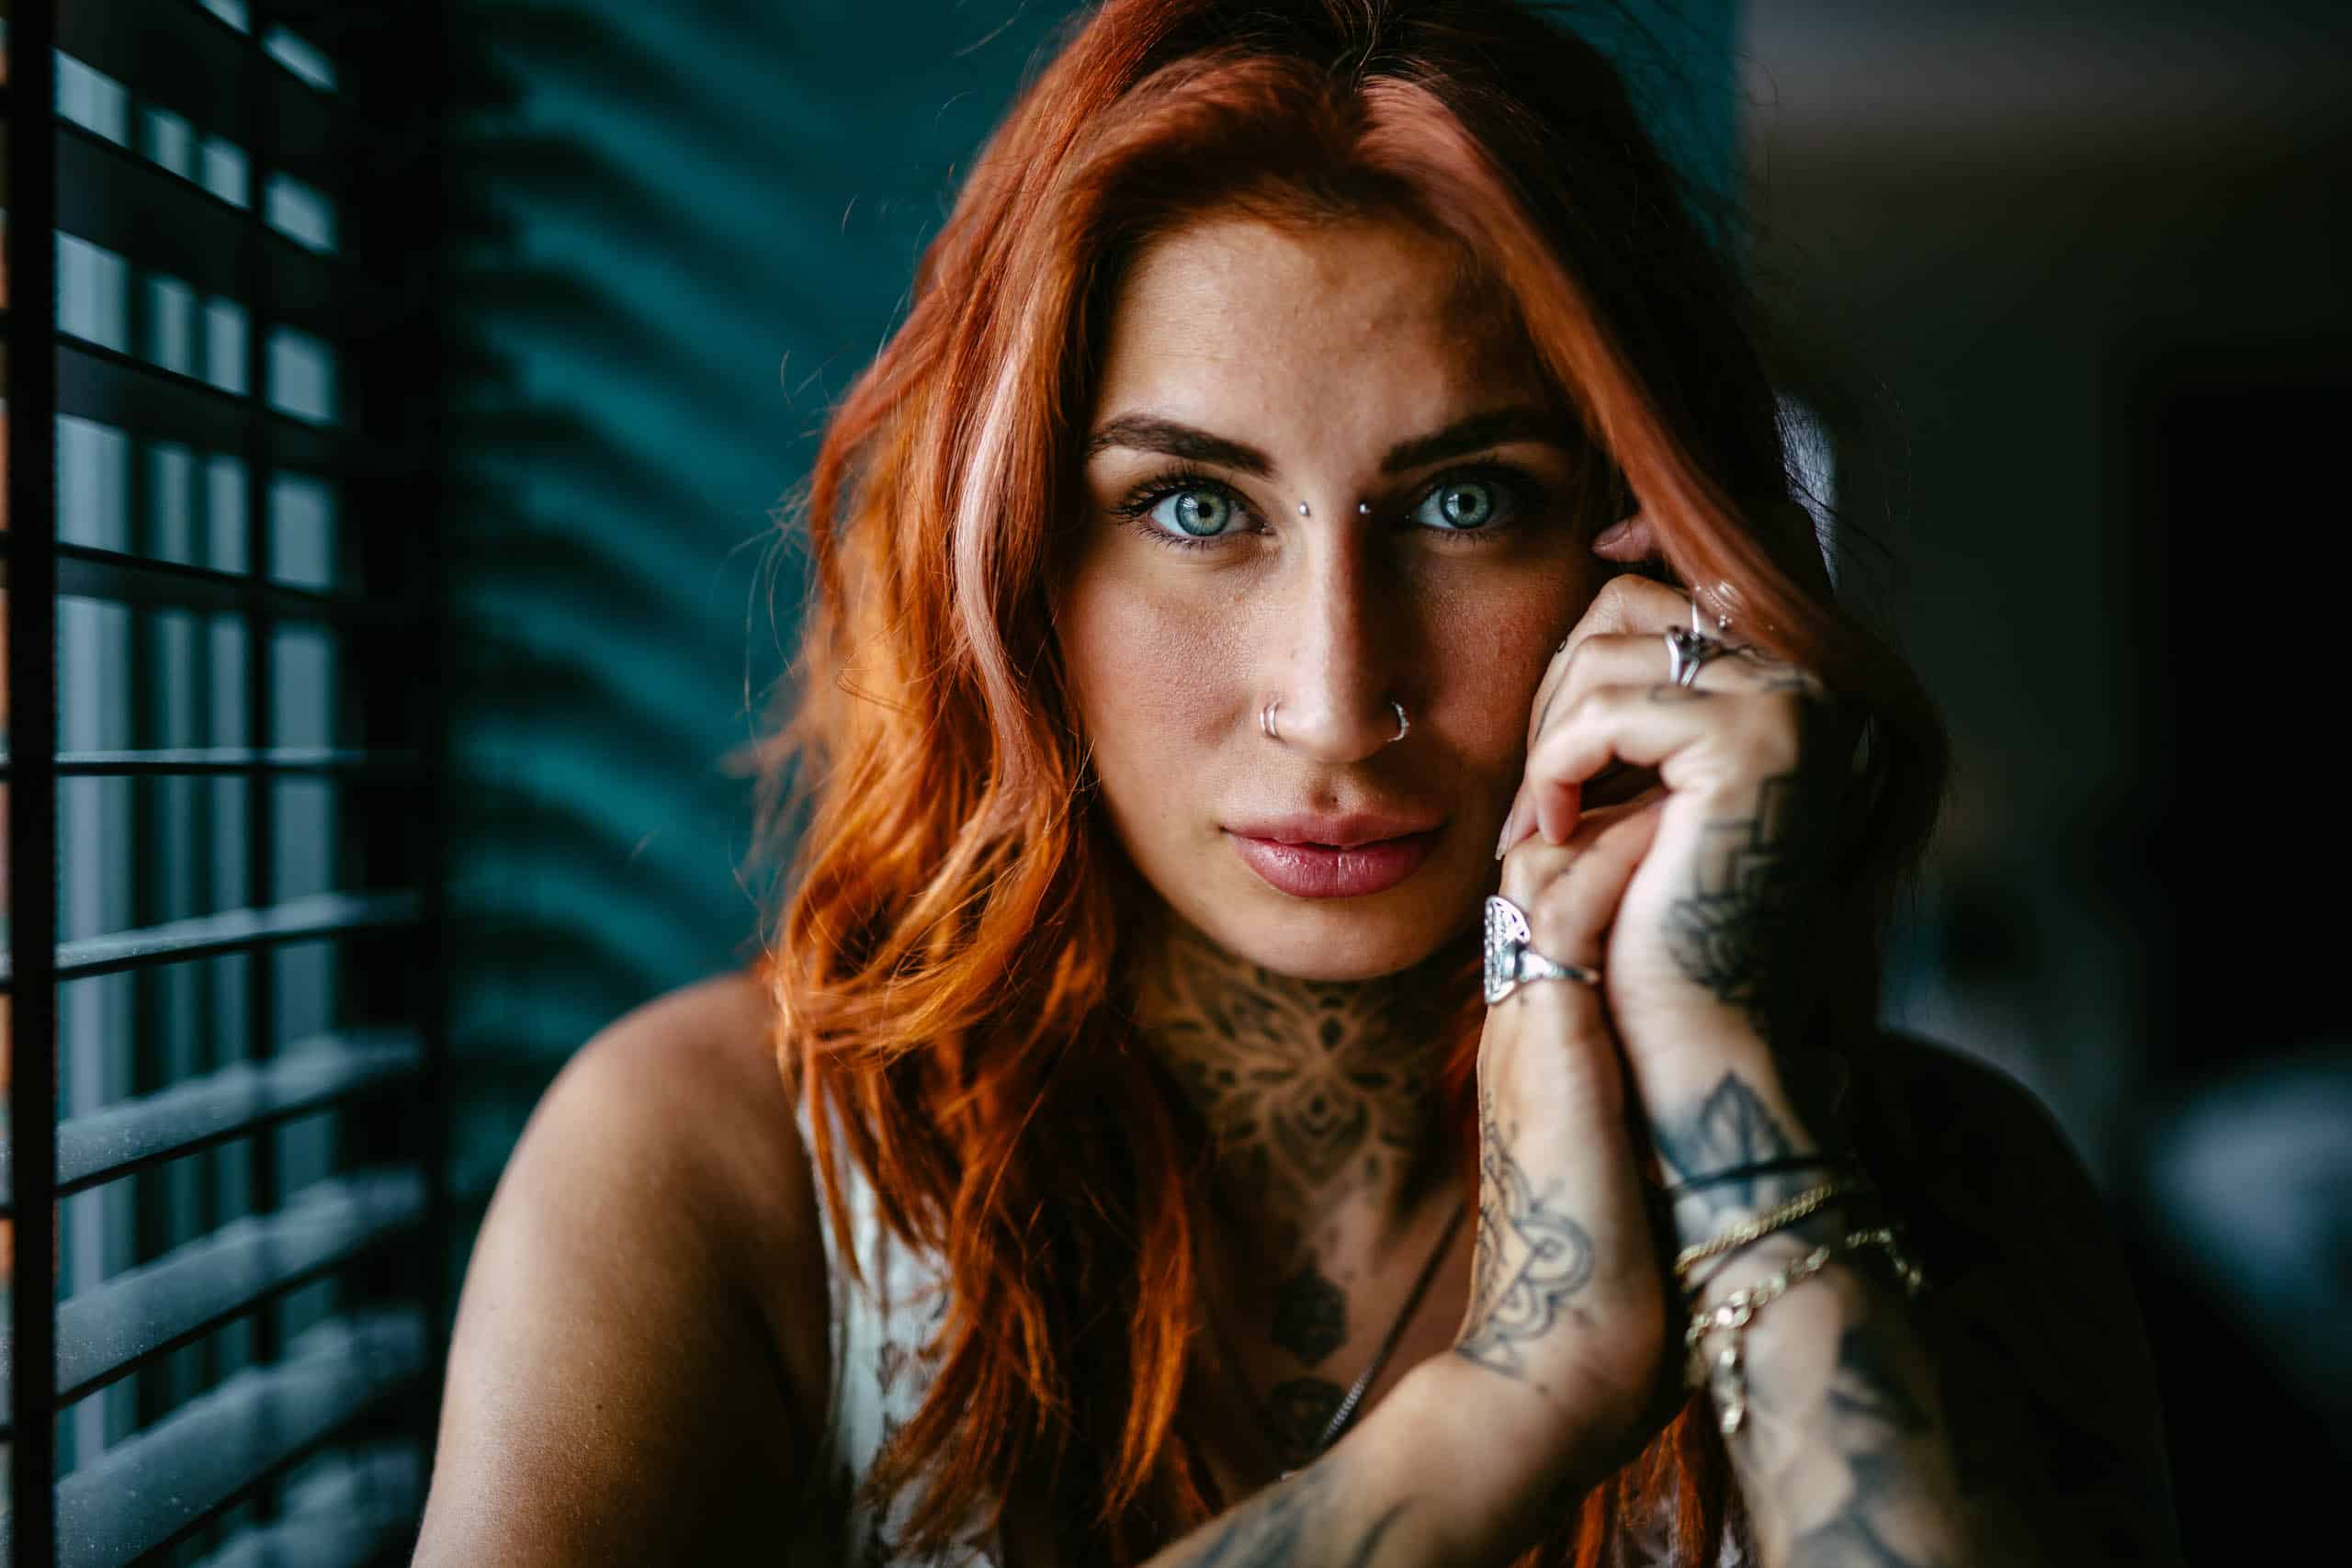 A woman with red hair and tattoos poses sensually during a boudoir shoot in Hoek van Holland.